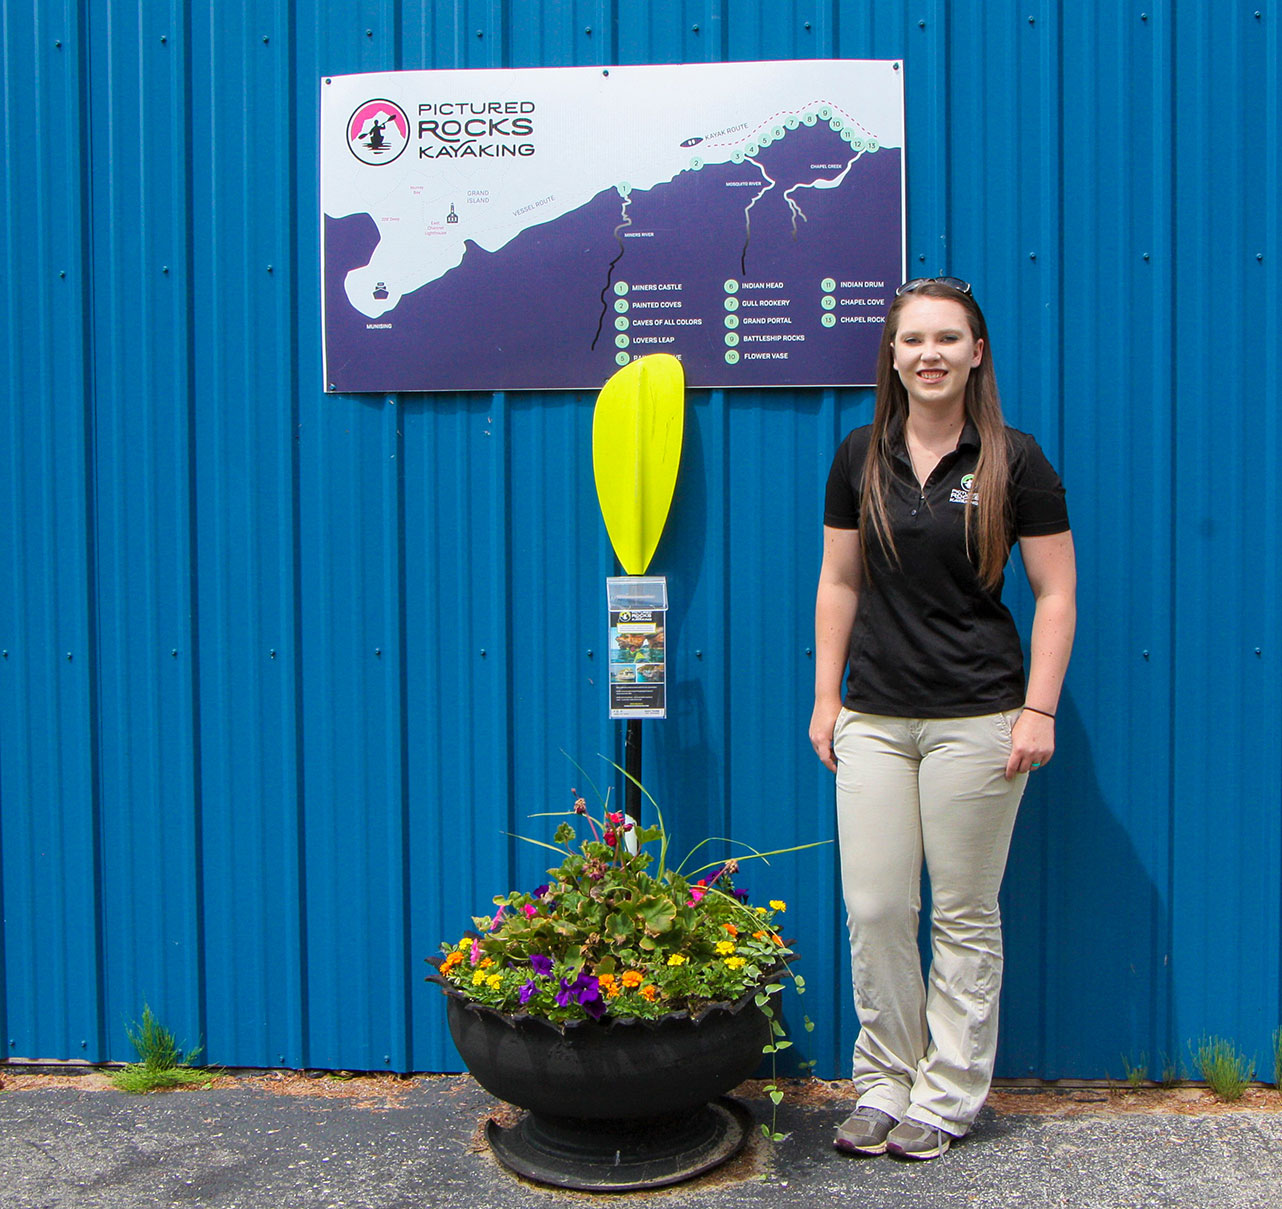 Abby Rahn, Pictured Rocks Kayaking’s office manager